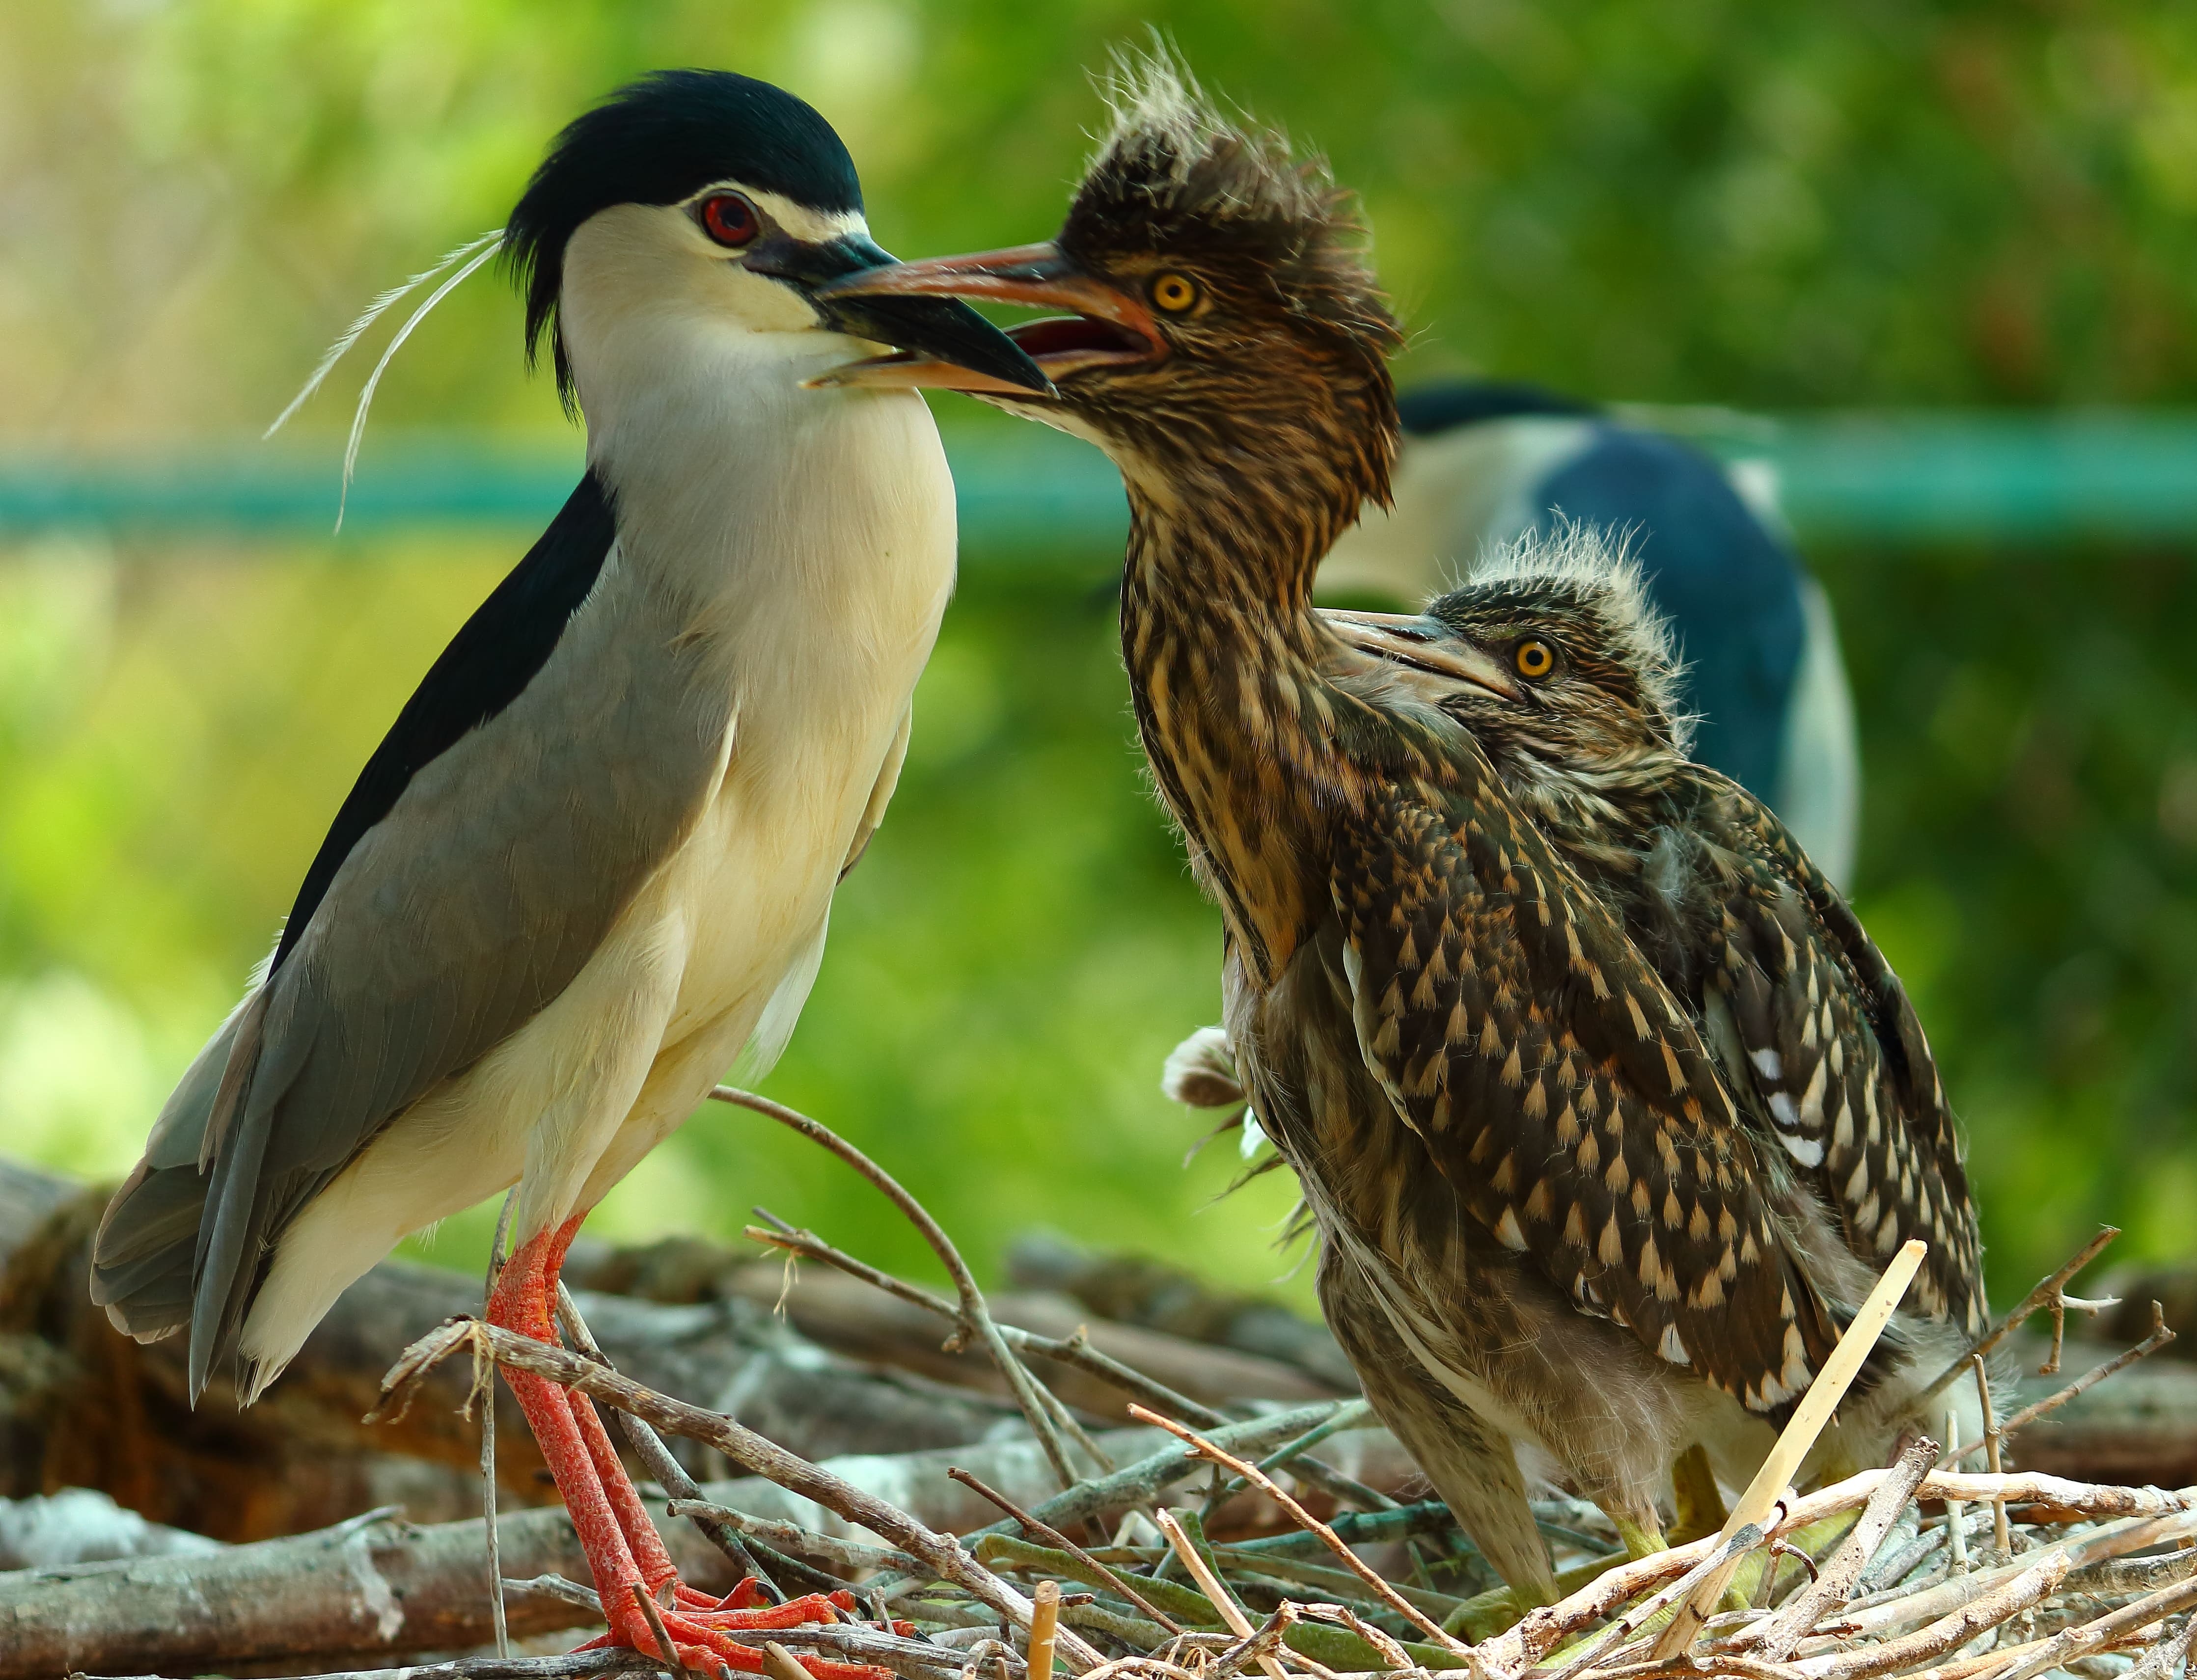 A Black Crowned Night Heron with its chicks